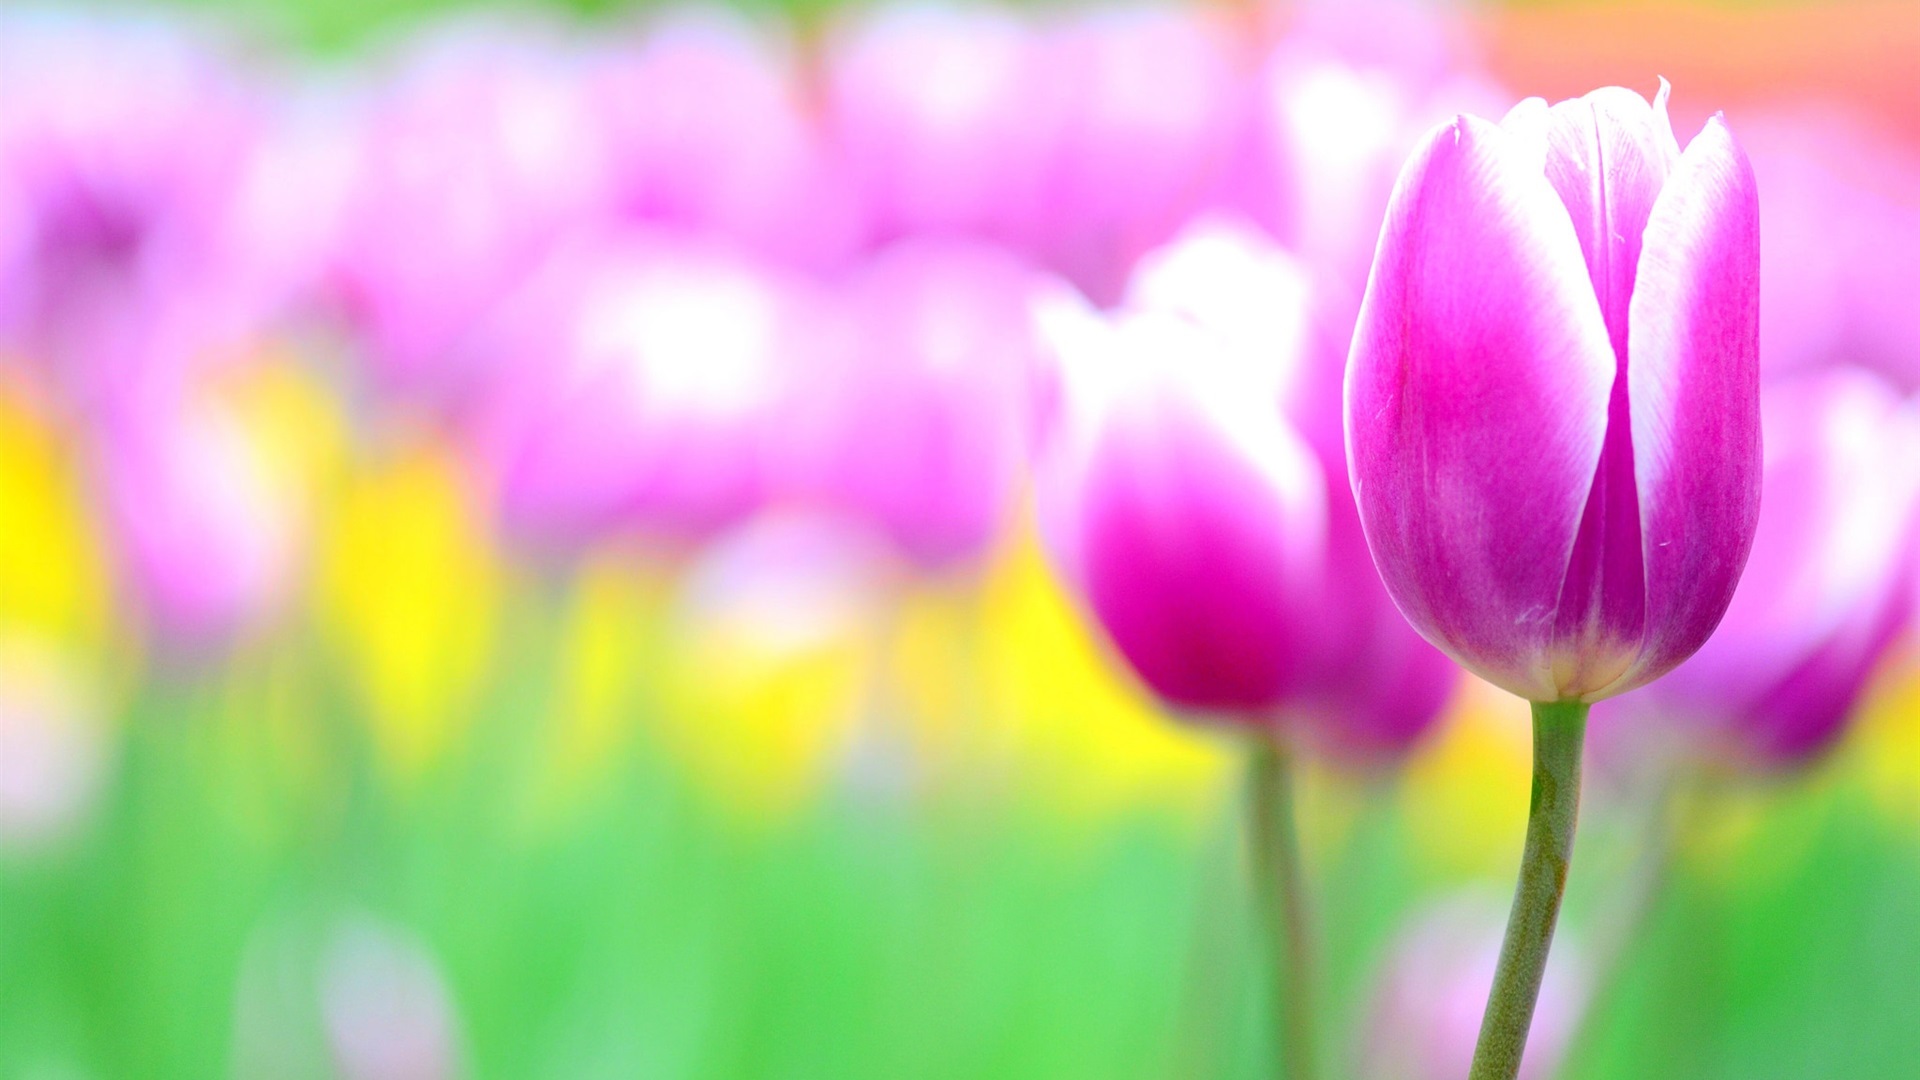 General 1920x1080 tulips flowers blurred plants nature daylight photography